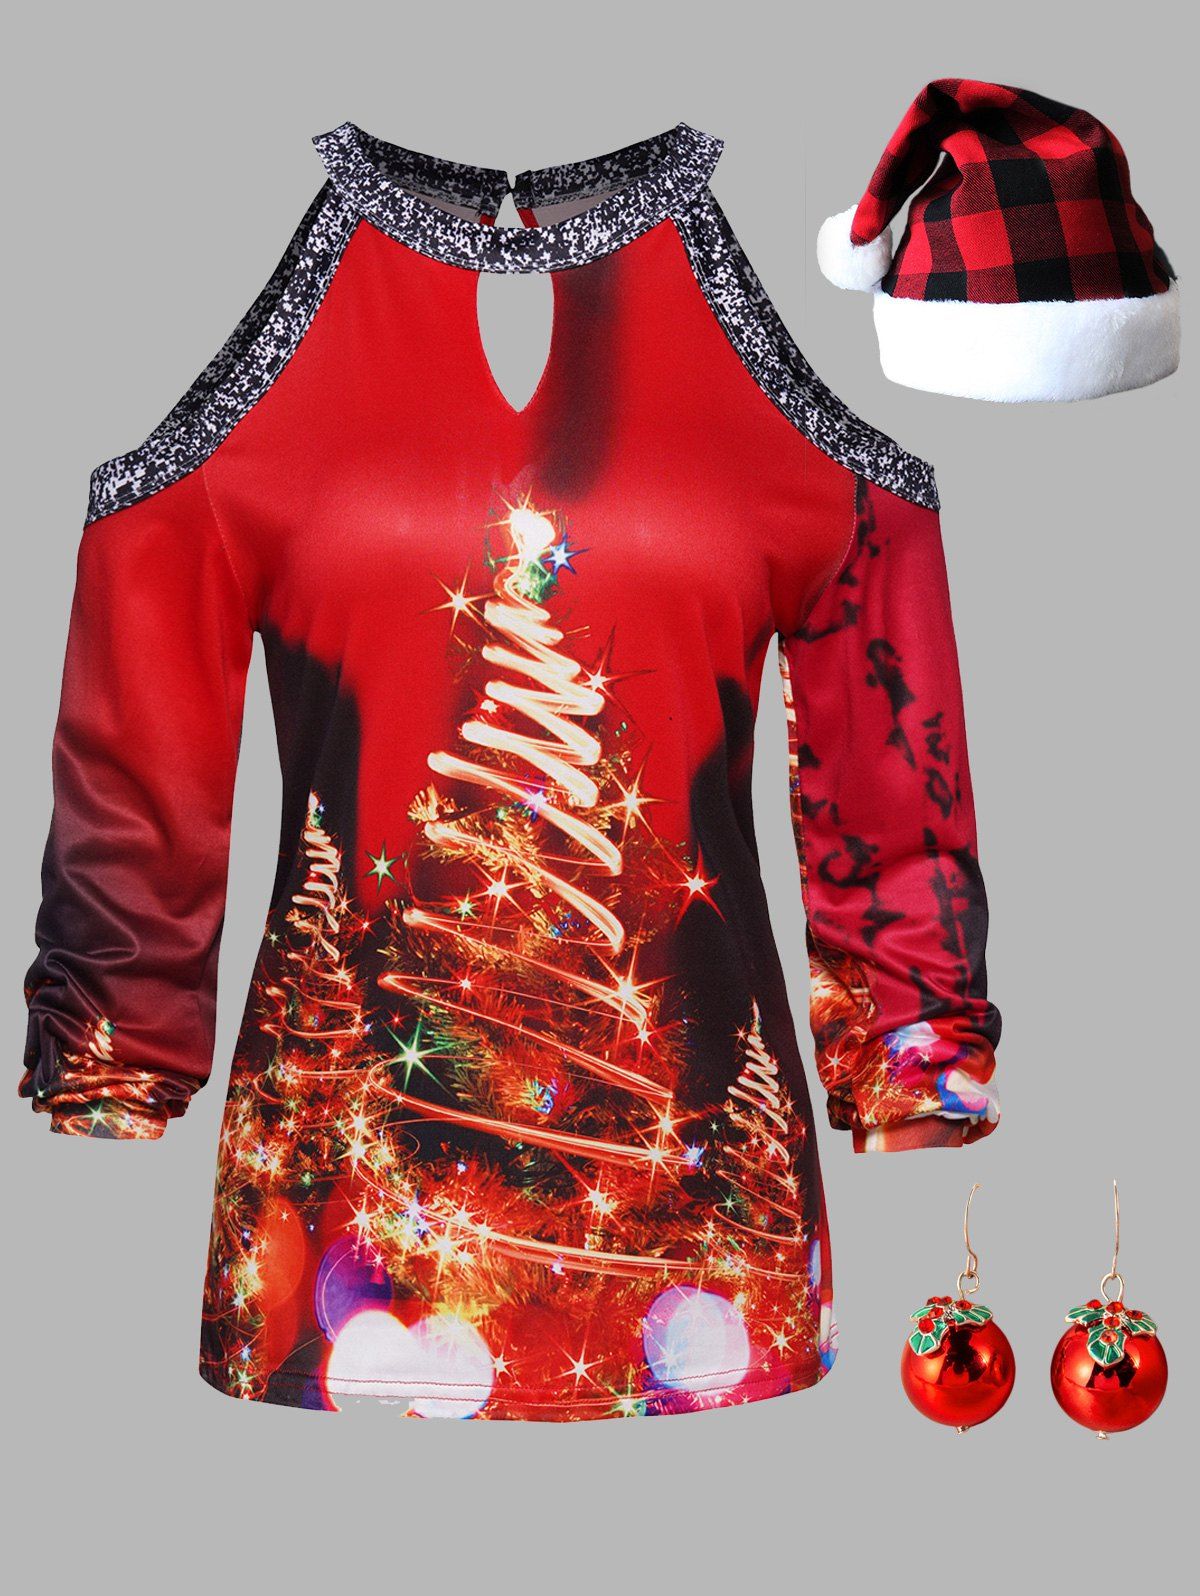 Sparkly Christmas Tree Print Cut Out Keyhole Top And Rhinestone Bell Earrings Plaid Hat Casual Outfit - multicolor M